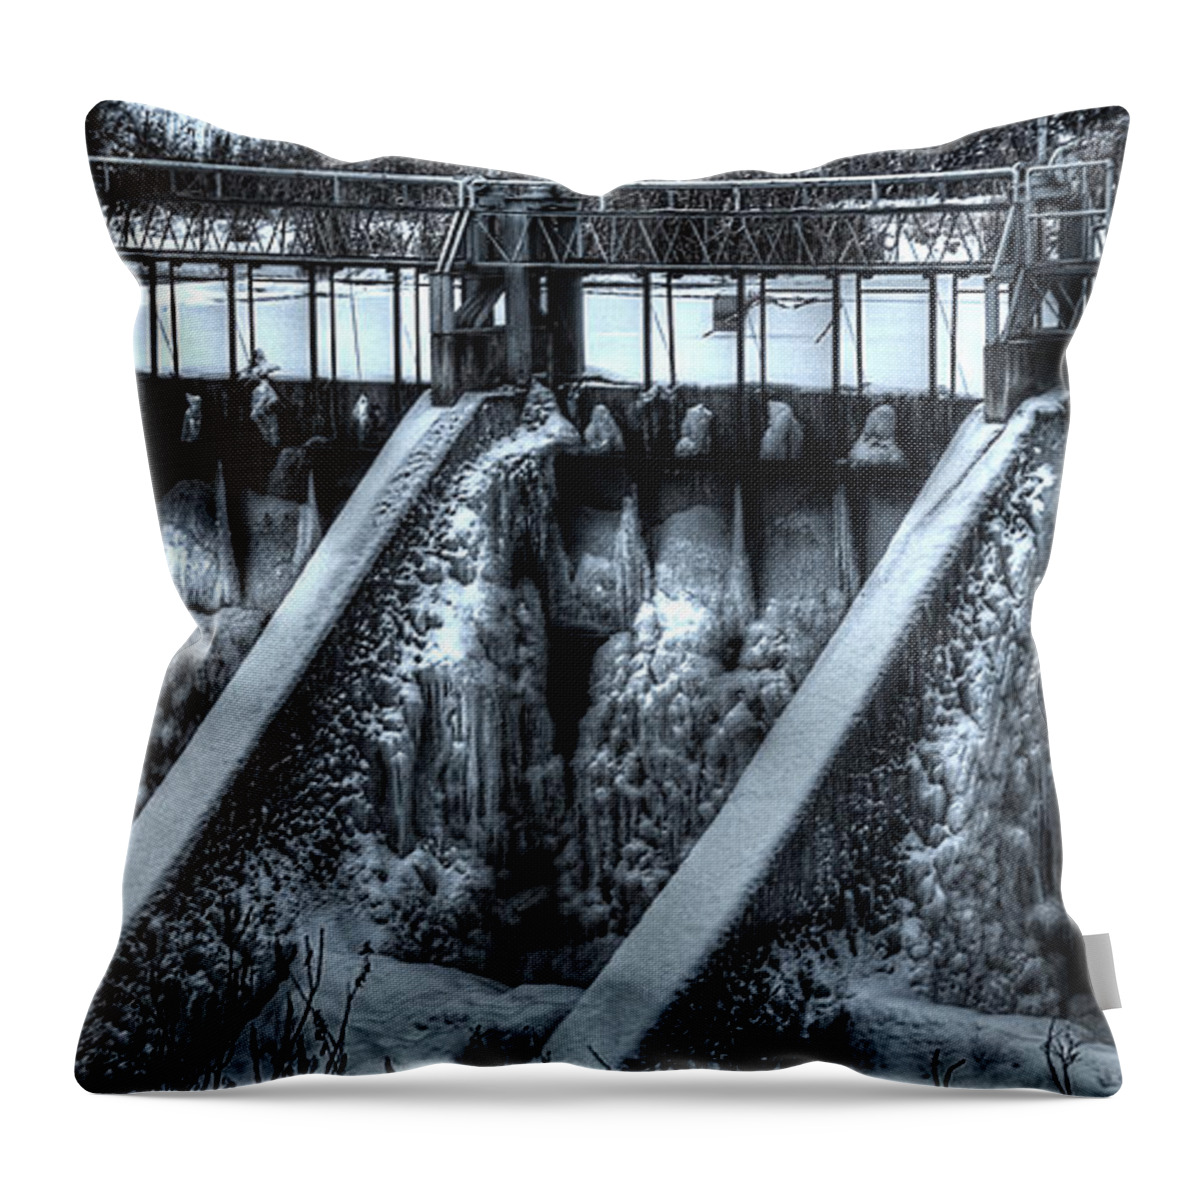 Meyers Falls Dam Throw Pillow featuring the photograph Meyers Falls Dam by Loni Collins